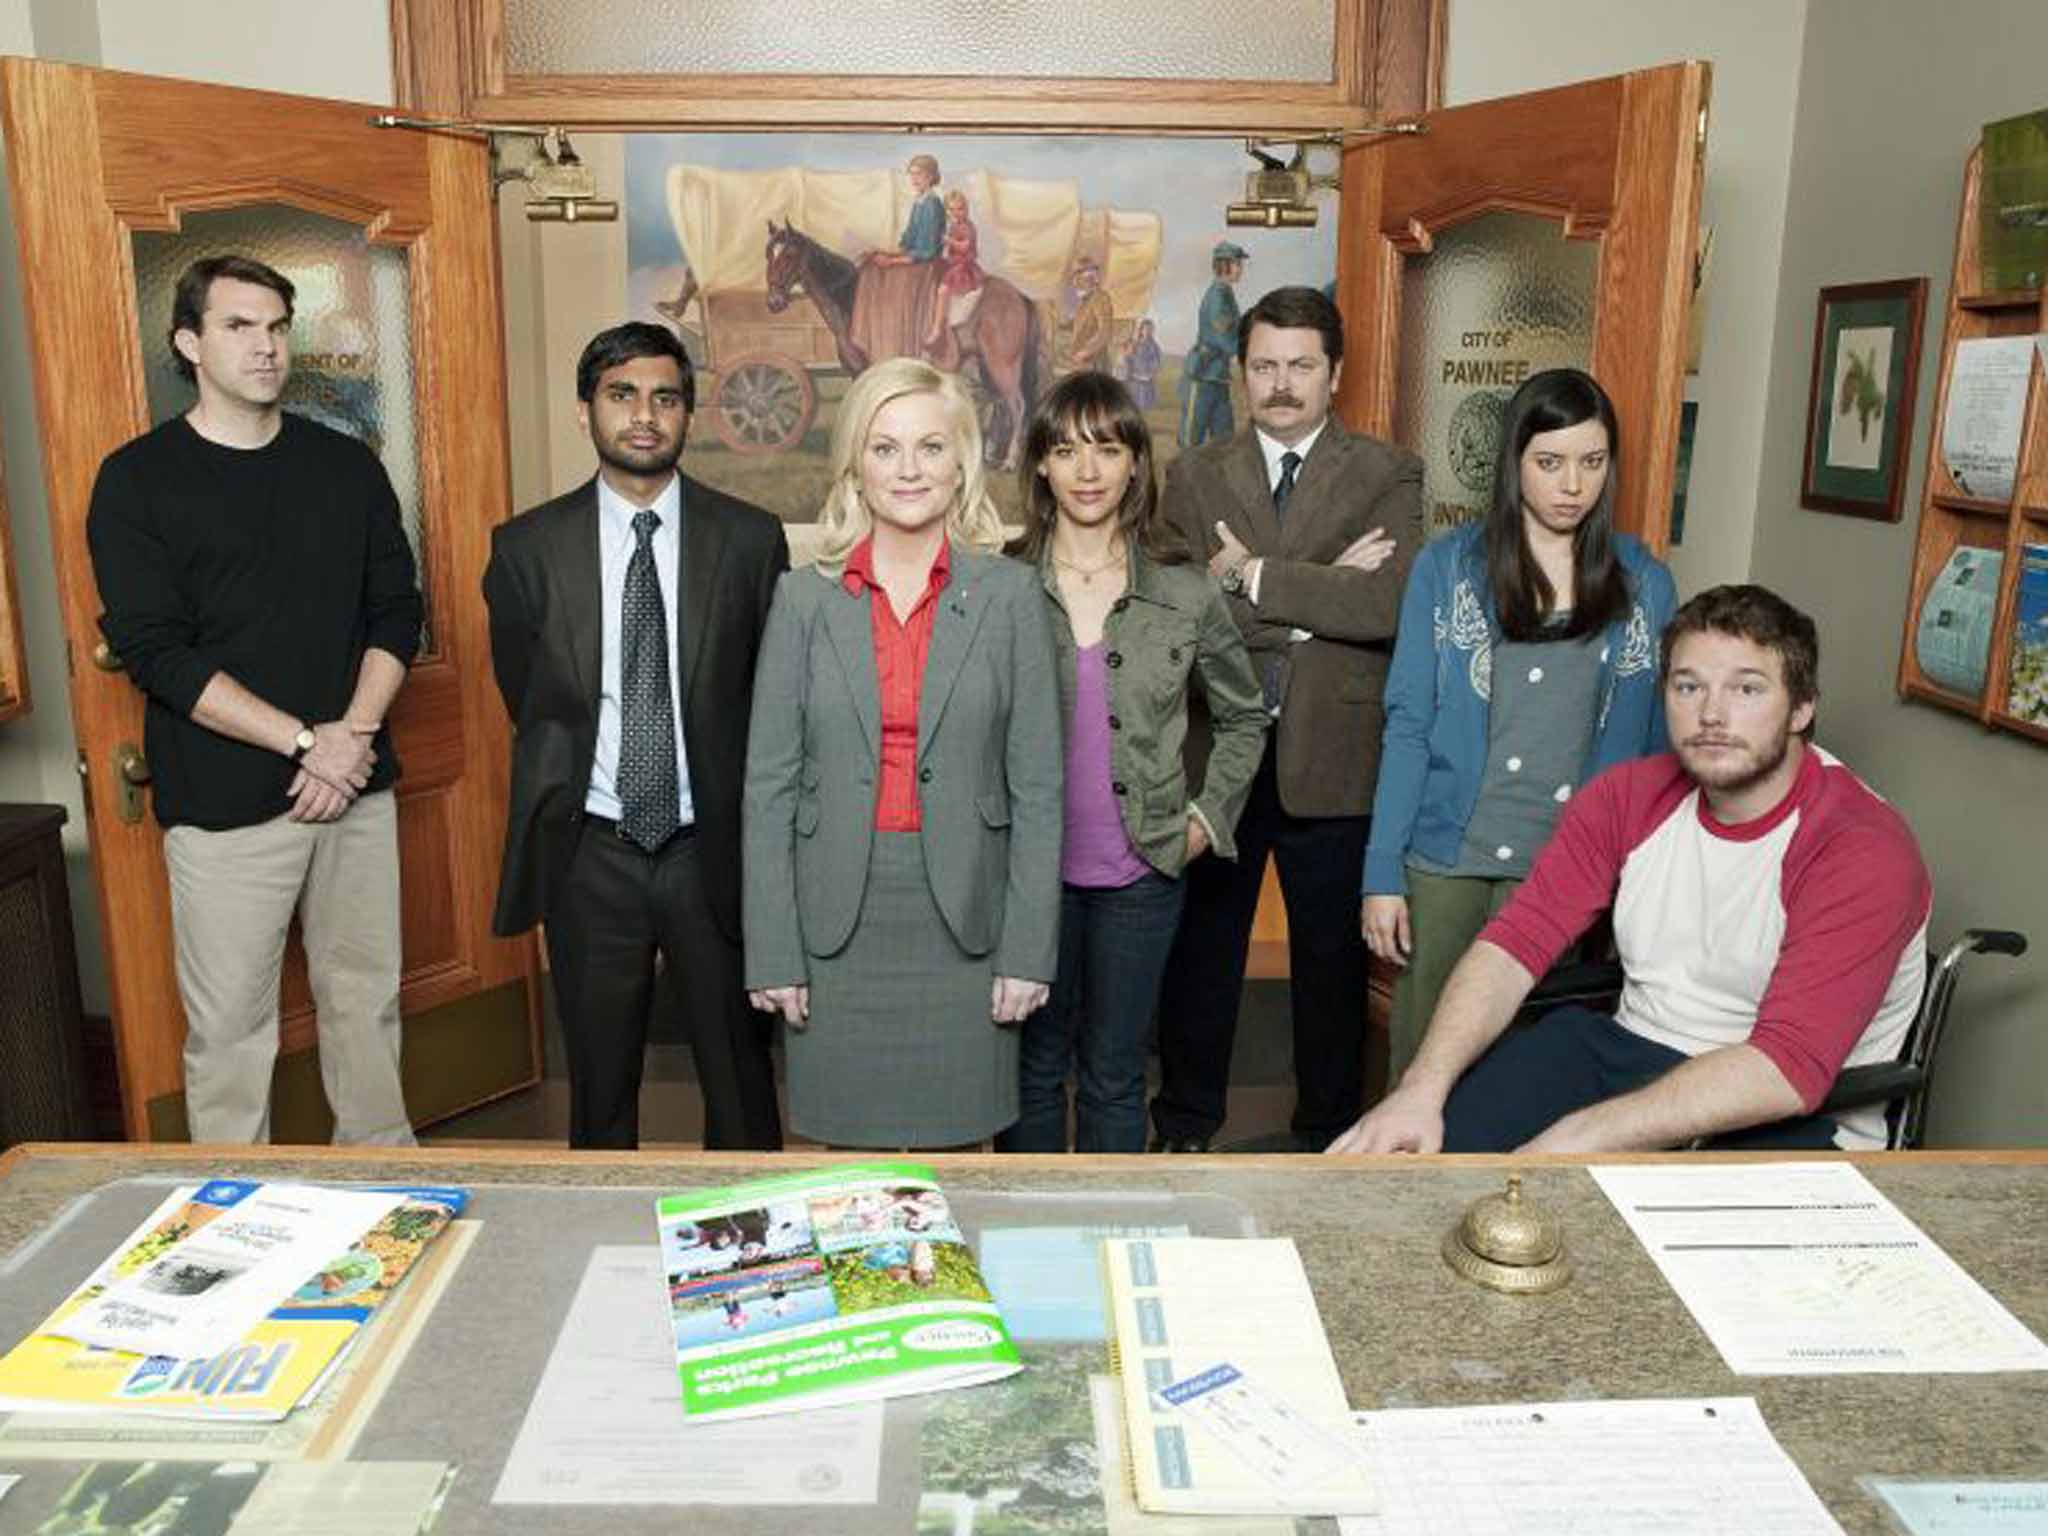 Ansari is familiar to British viewers from the sitcom 'Parks and Recreation'.